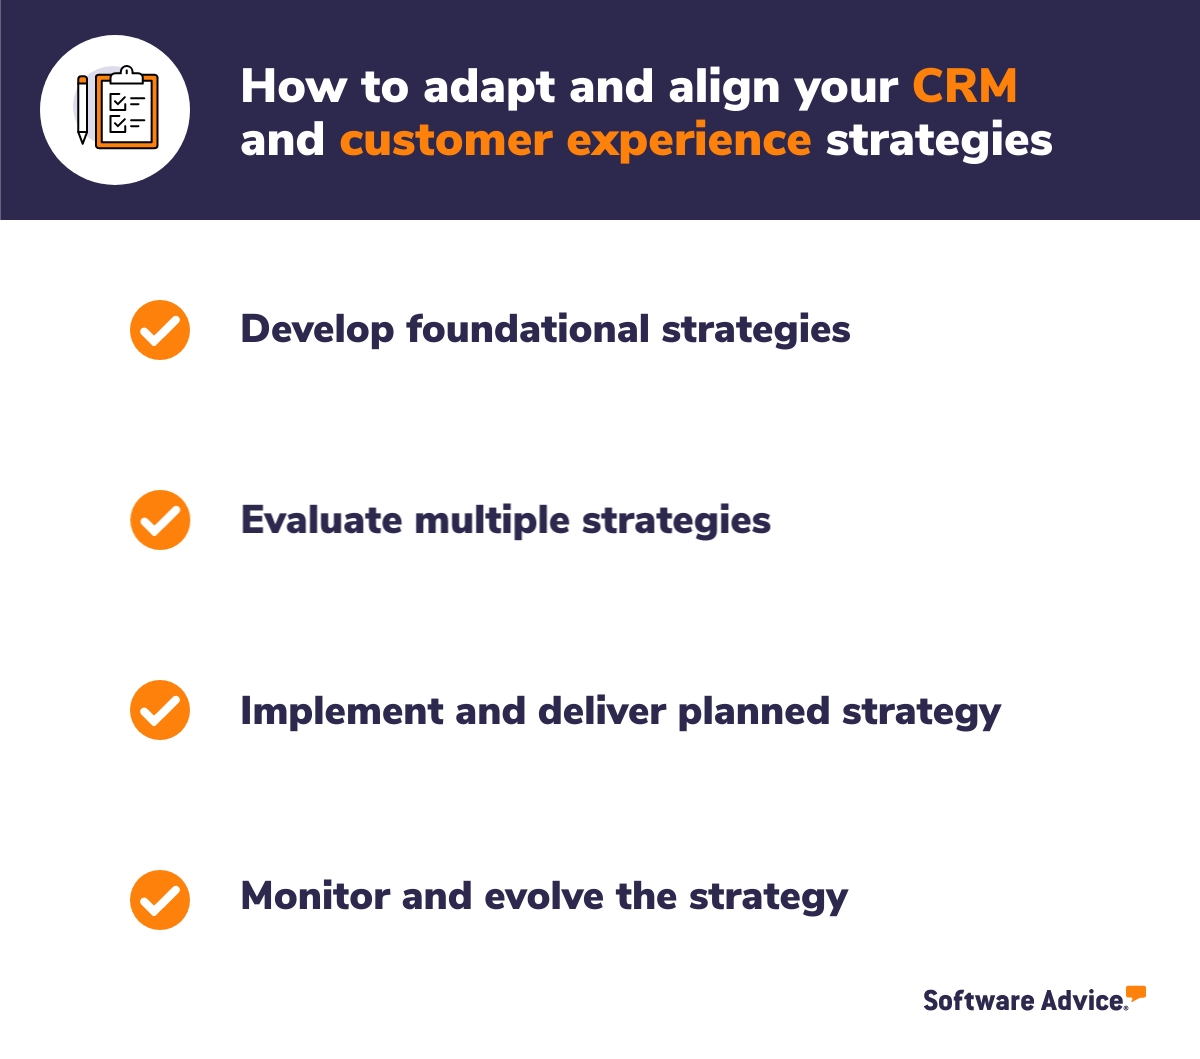 How to adapt and align your CRM and customer experience strategies.